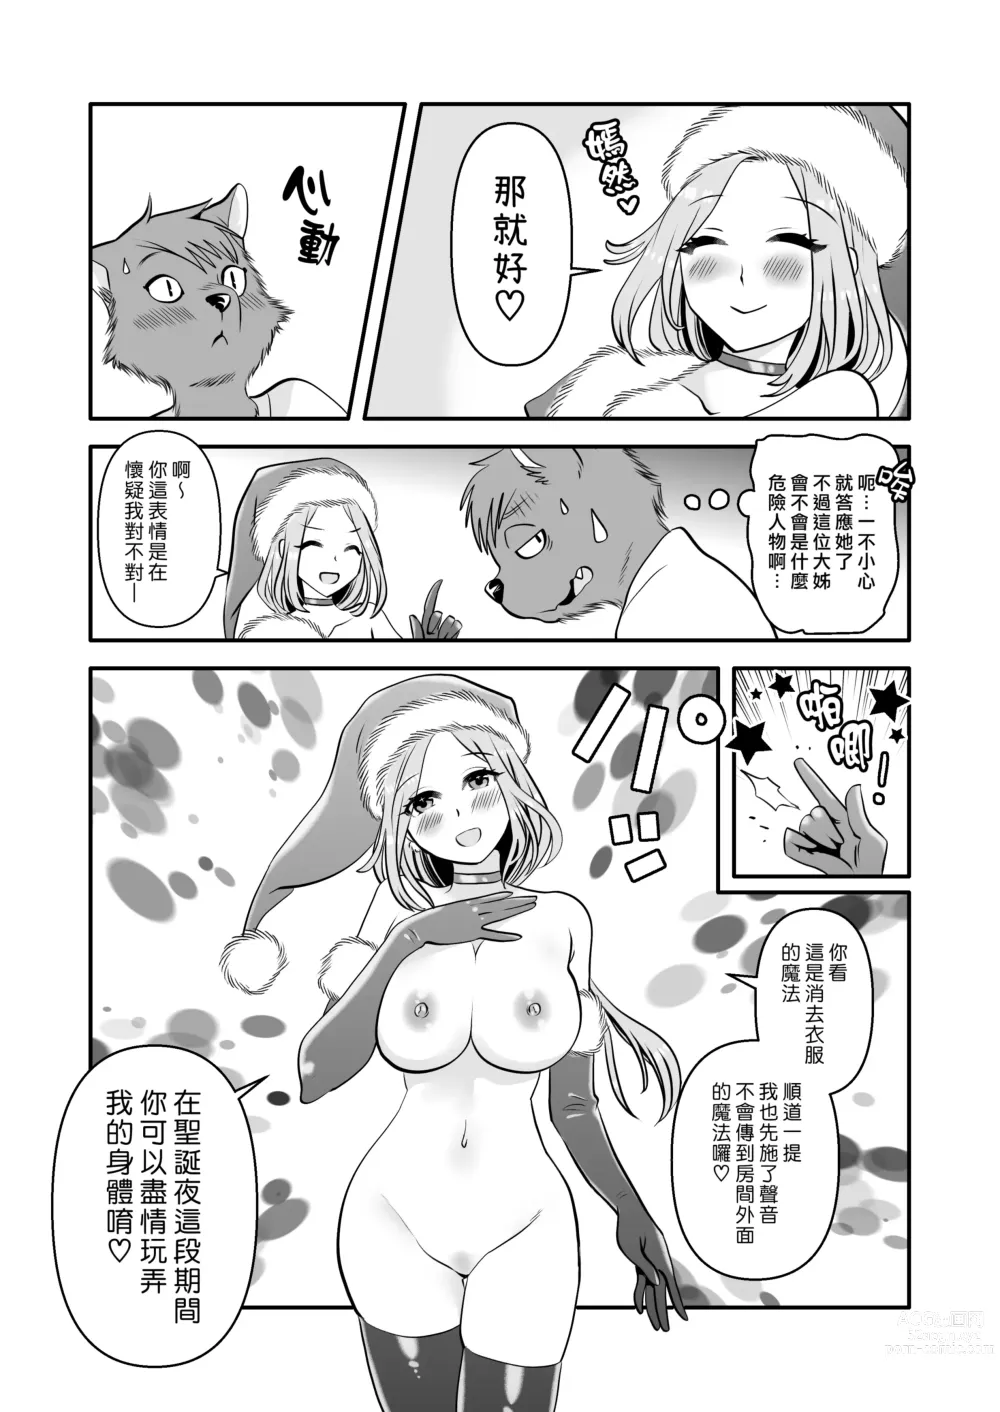 Page 9 of doujinshi 獸人君與聖誕大姊姊